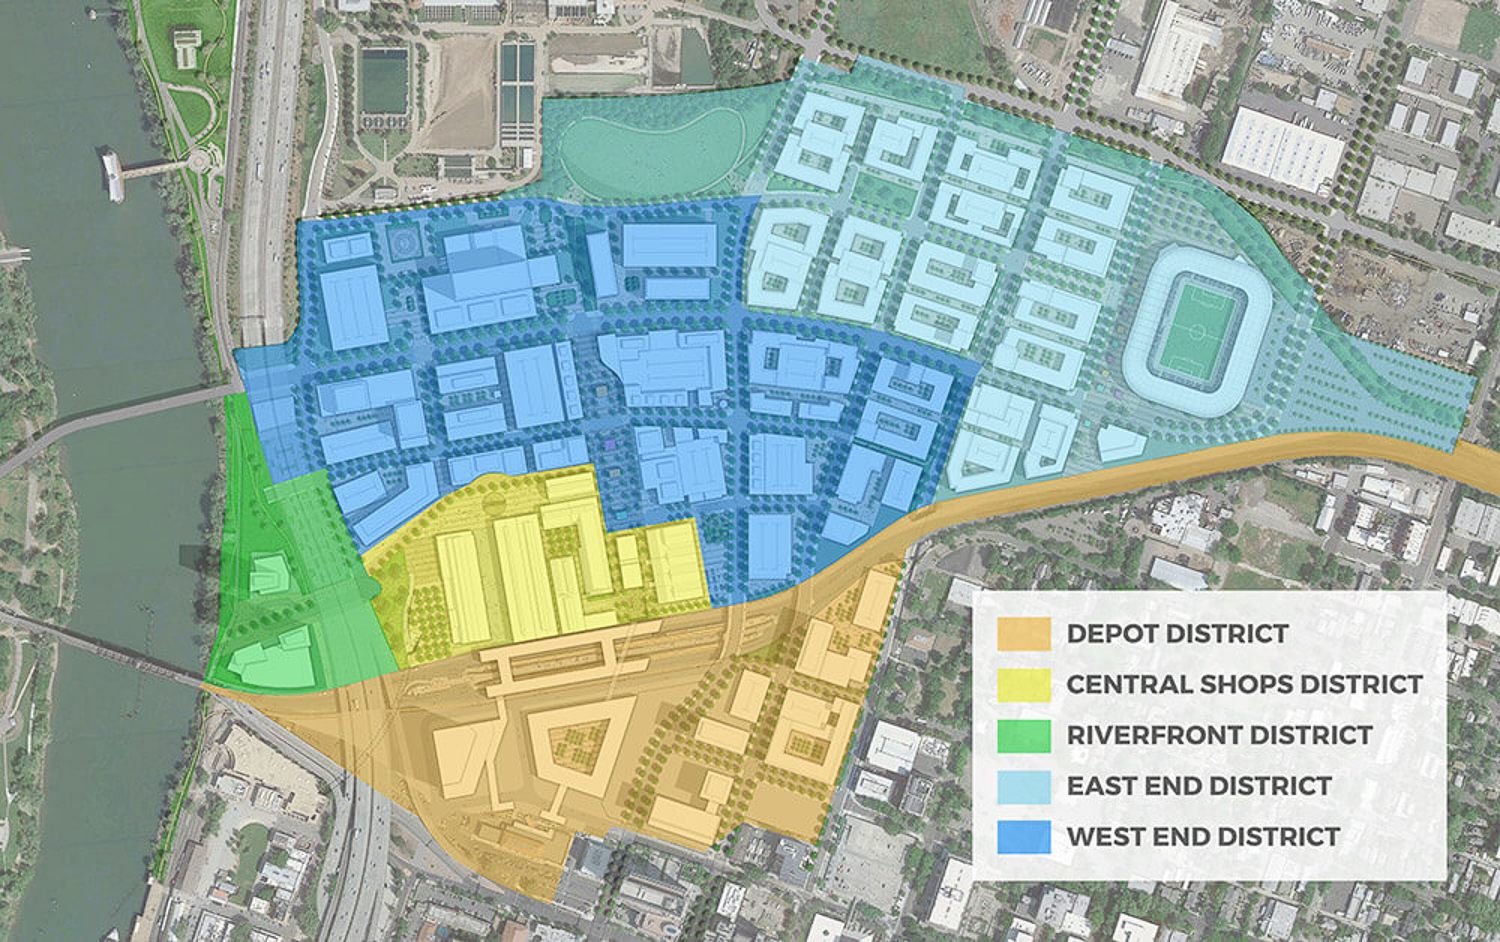 The five districts within The Railyards master plan